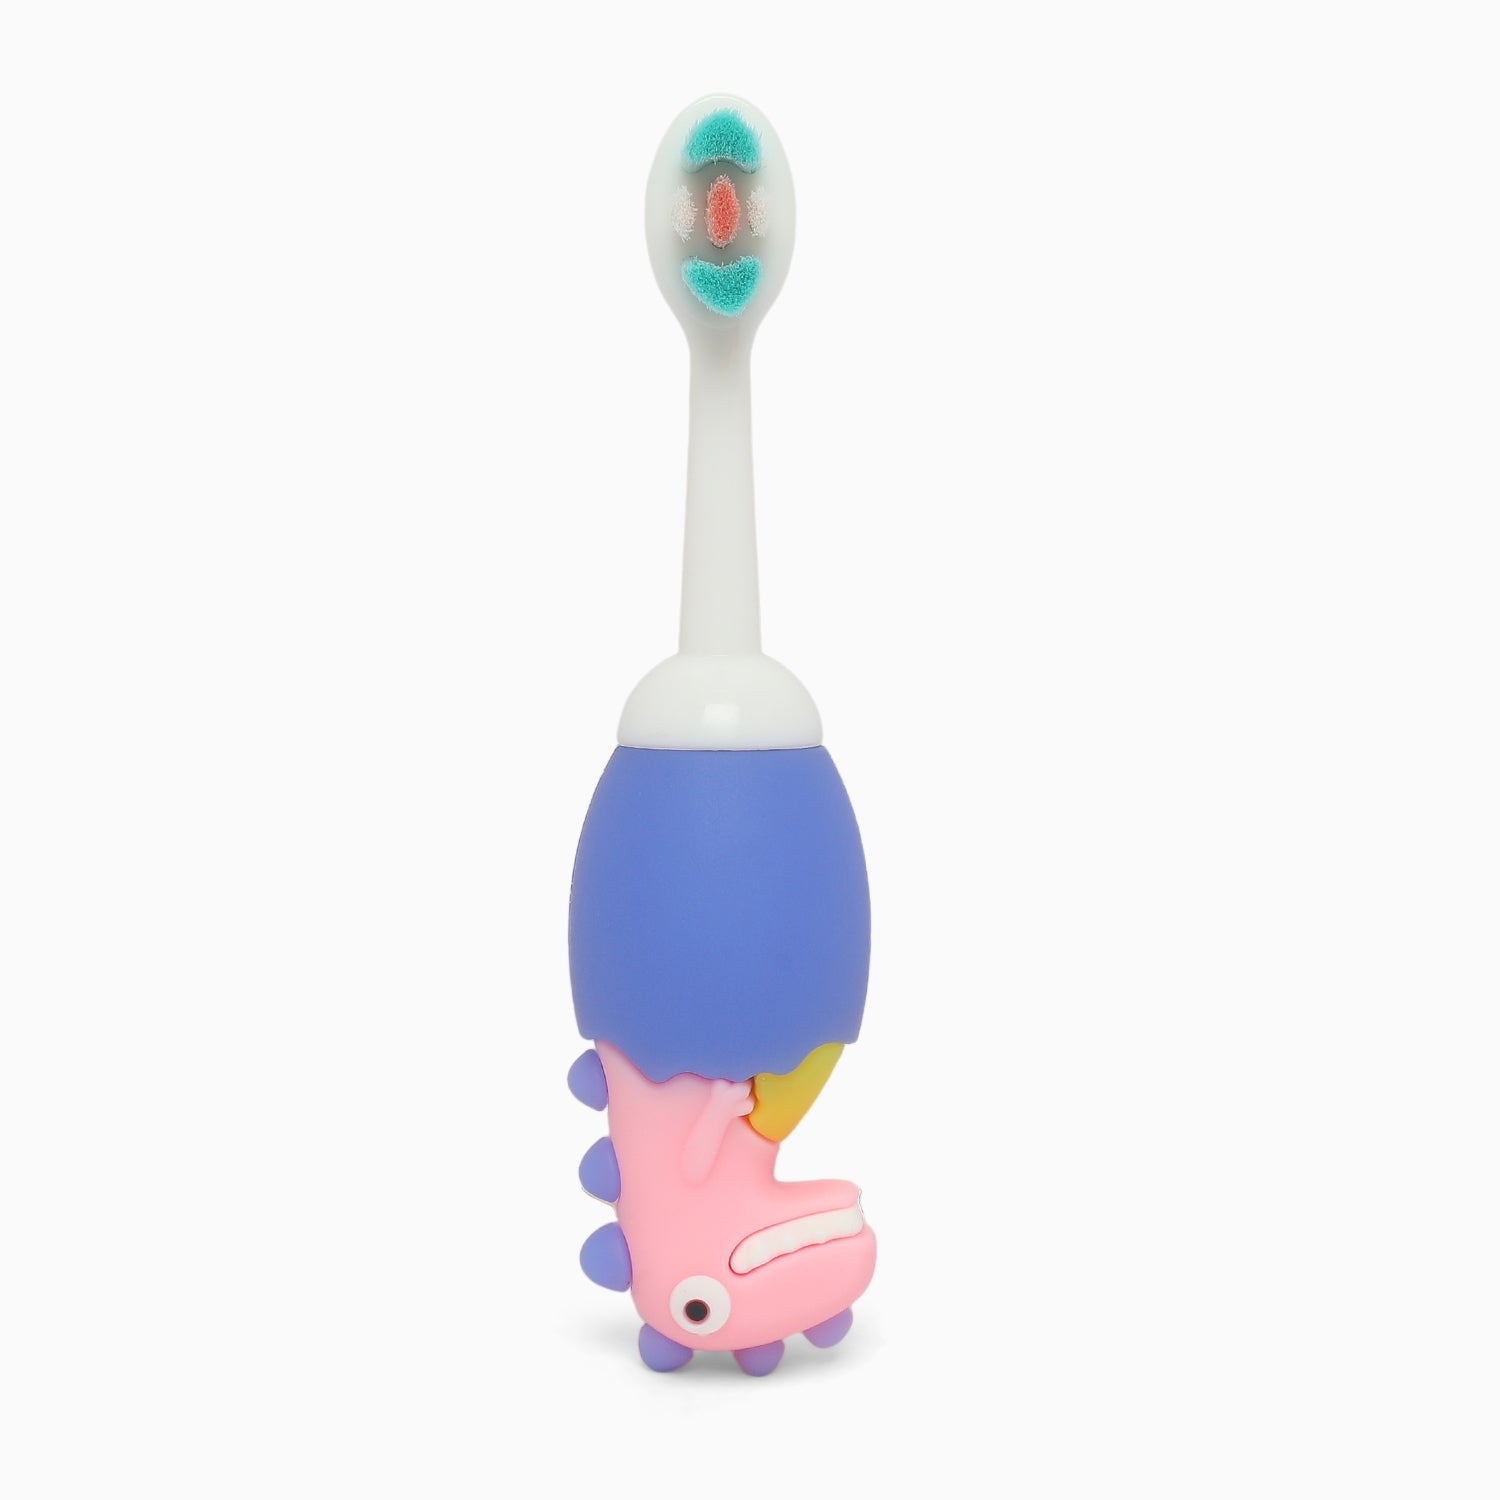 ZORSE baby toothbrush special curated for your child's teeth in style for 2-7 year olds (dinosaur random-print) - Kidspark